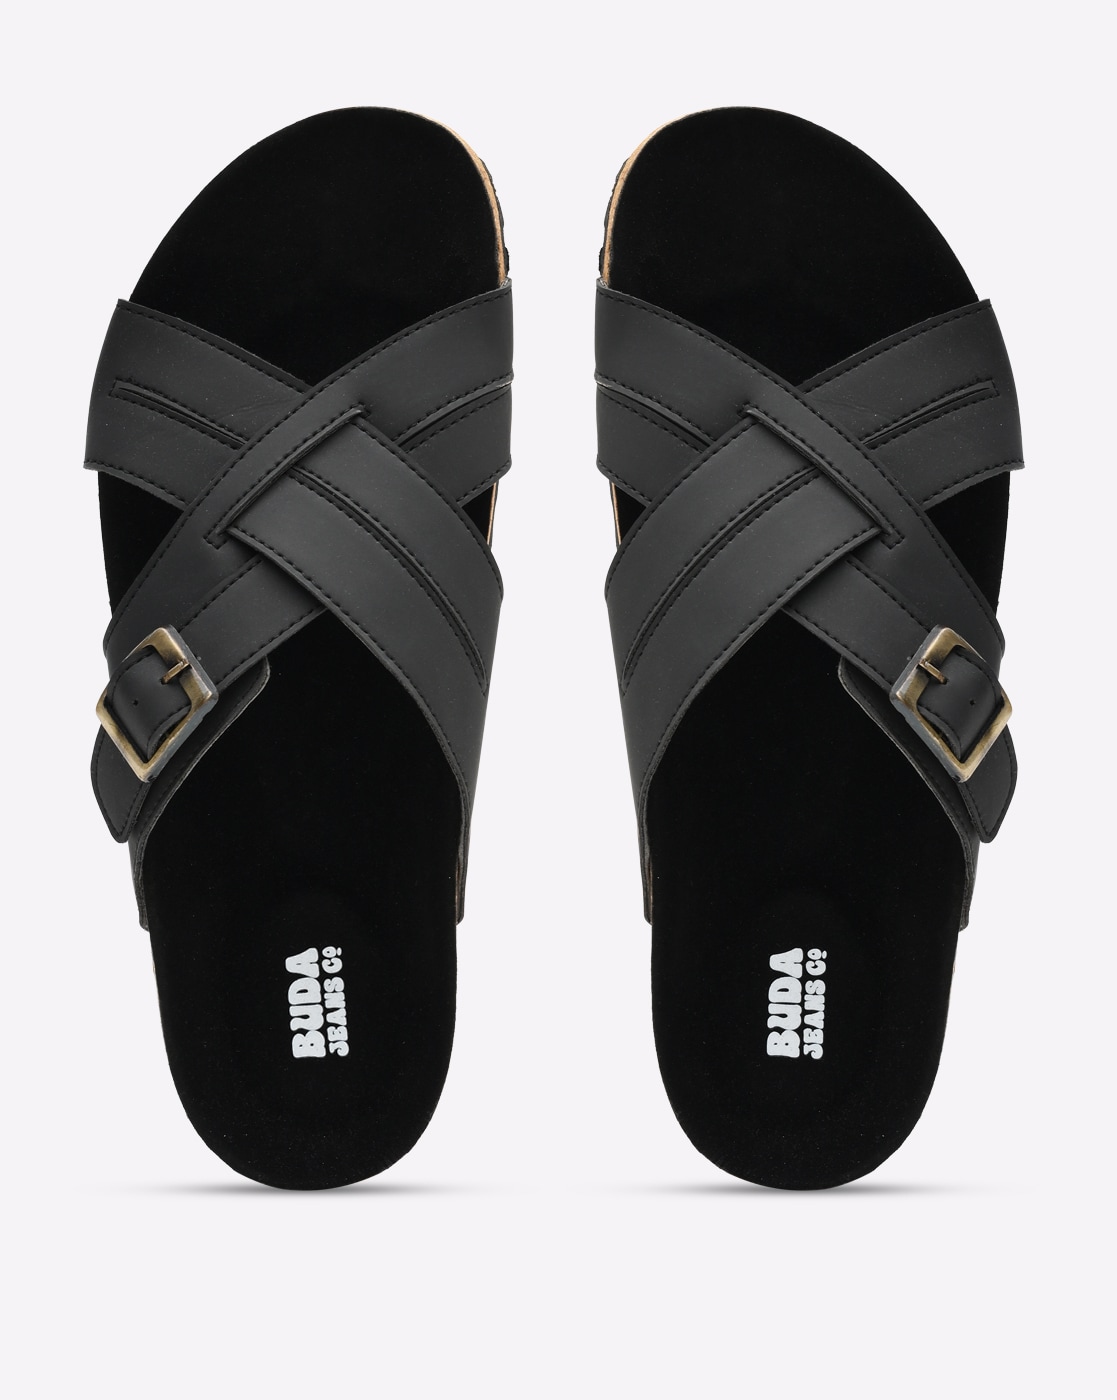 Buy CROSSFINGER Men's Causal Boys Sandal Fashion Sandals Lightweight,Cross  Strap Sandal Online In India At Discounted Prices